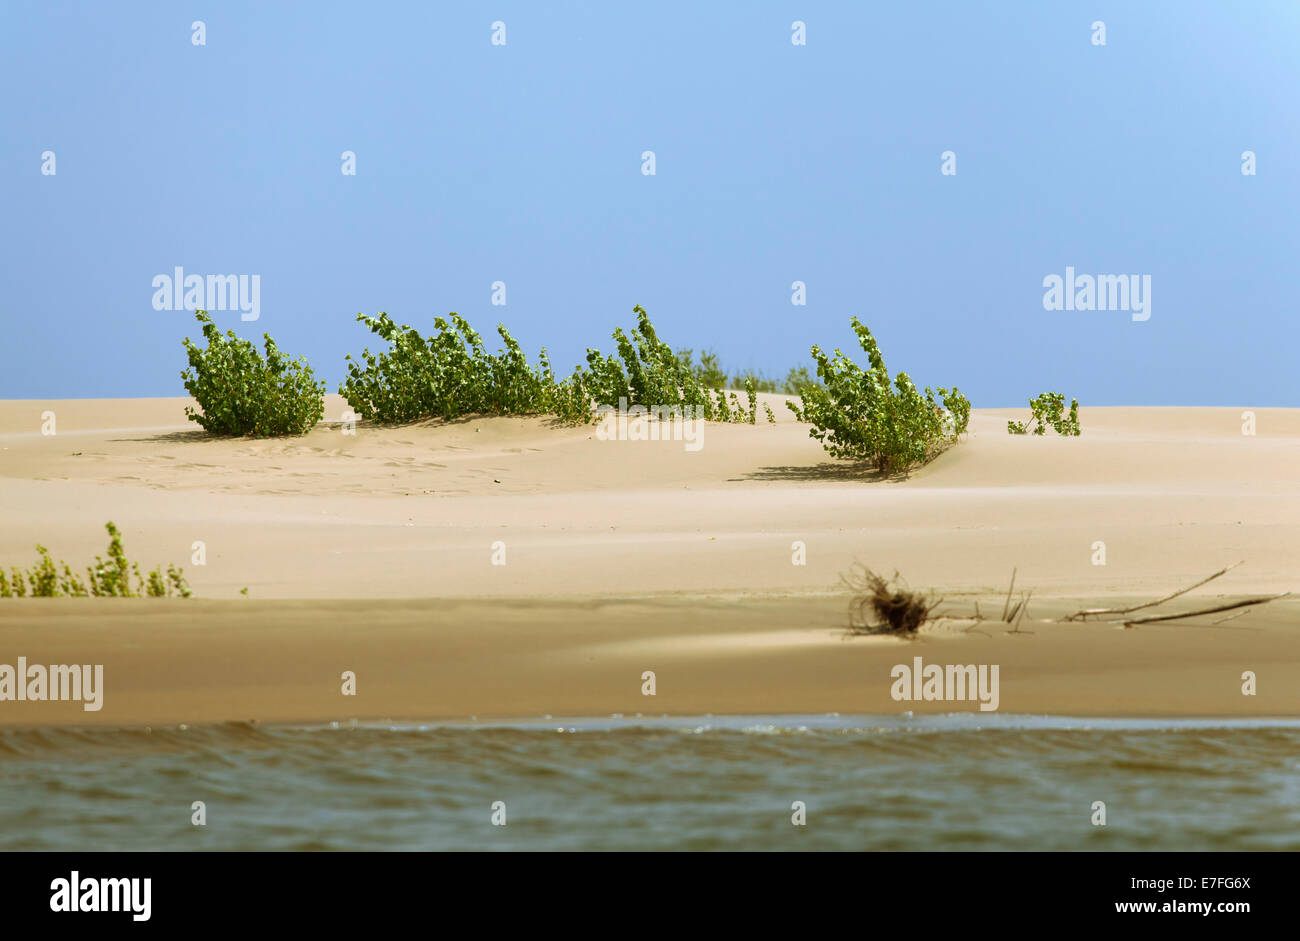 Plant growing in the sand adapted to the hot climate Stock Photo